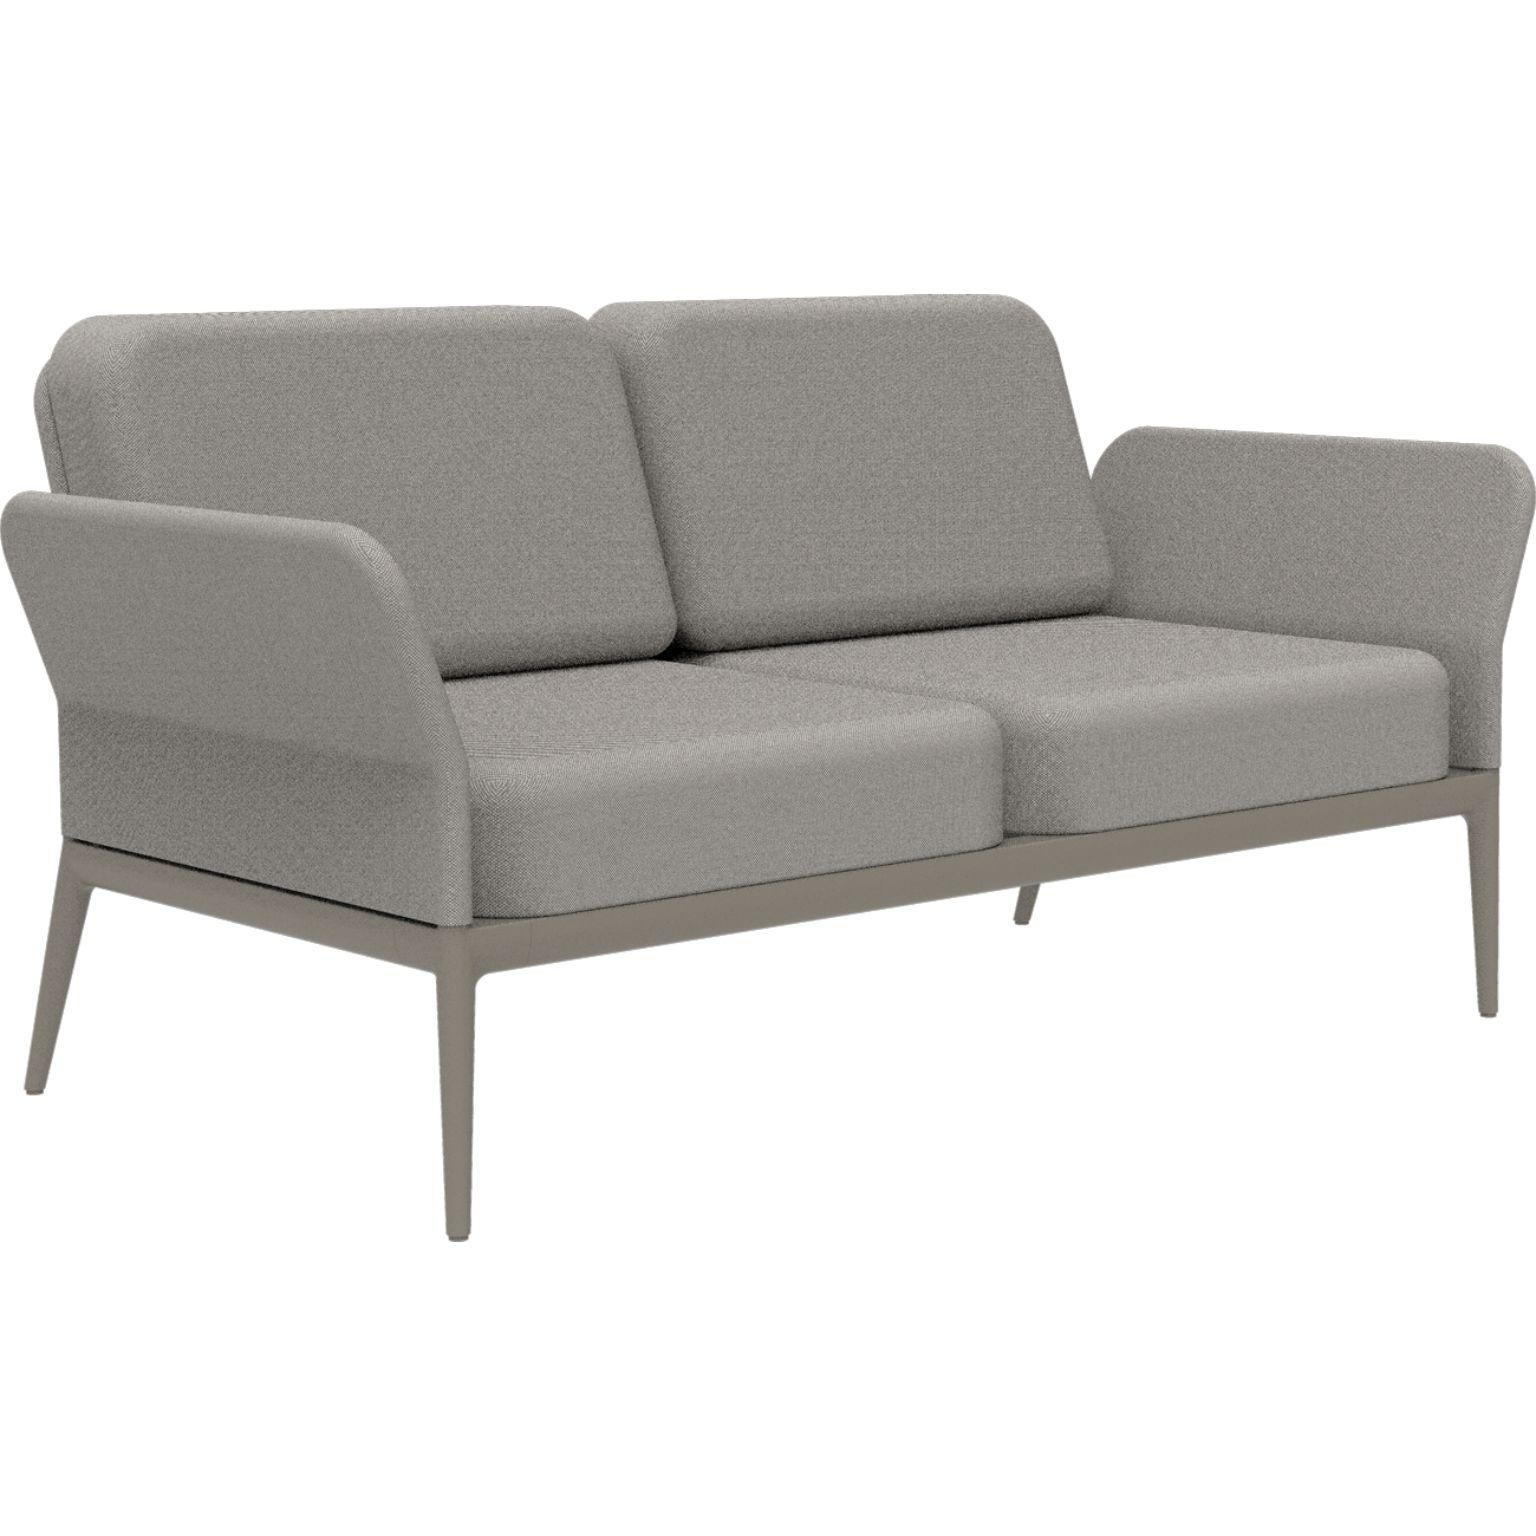 Cover Cream Sofa by MOWEE.
Dimensions: D83 x W160 x H81 cm (seat height 42 cm).
Material: aluminum and upholstery.
Weight: 32 kg.
Also available in different colors and finishes.

An unmistakable collection for its beauty and robustness. A